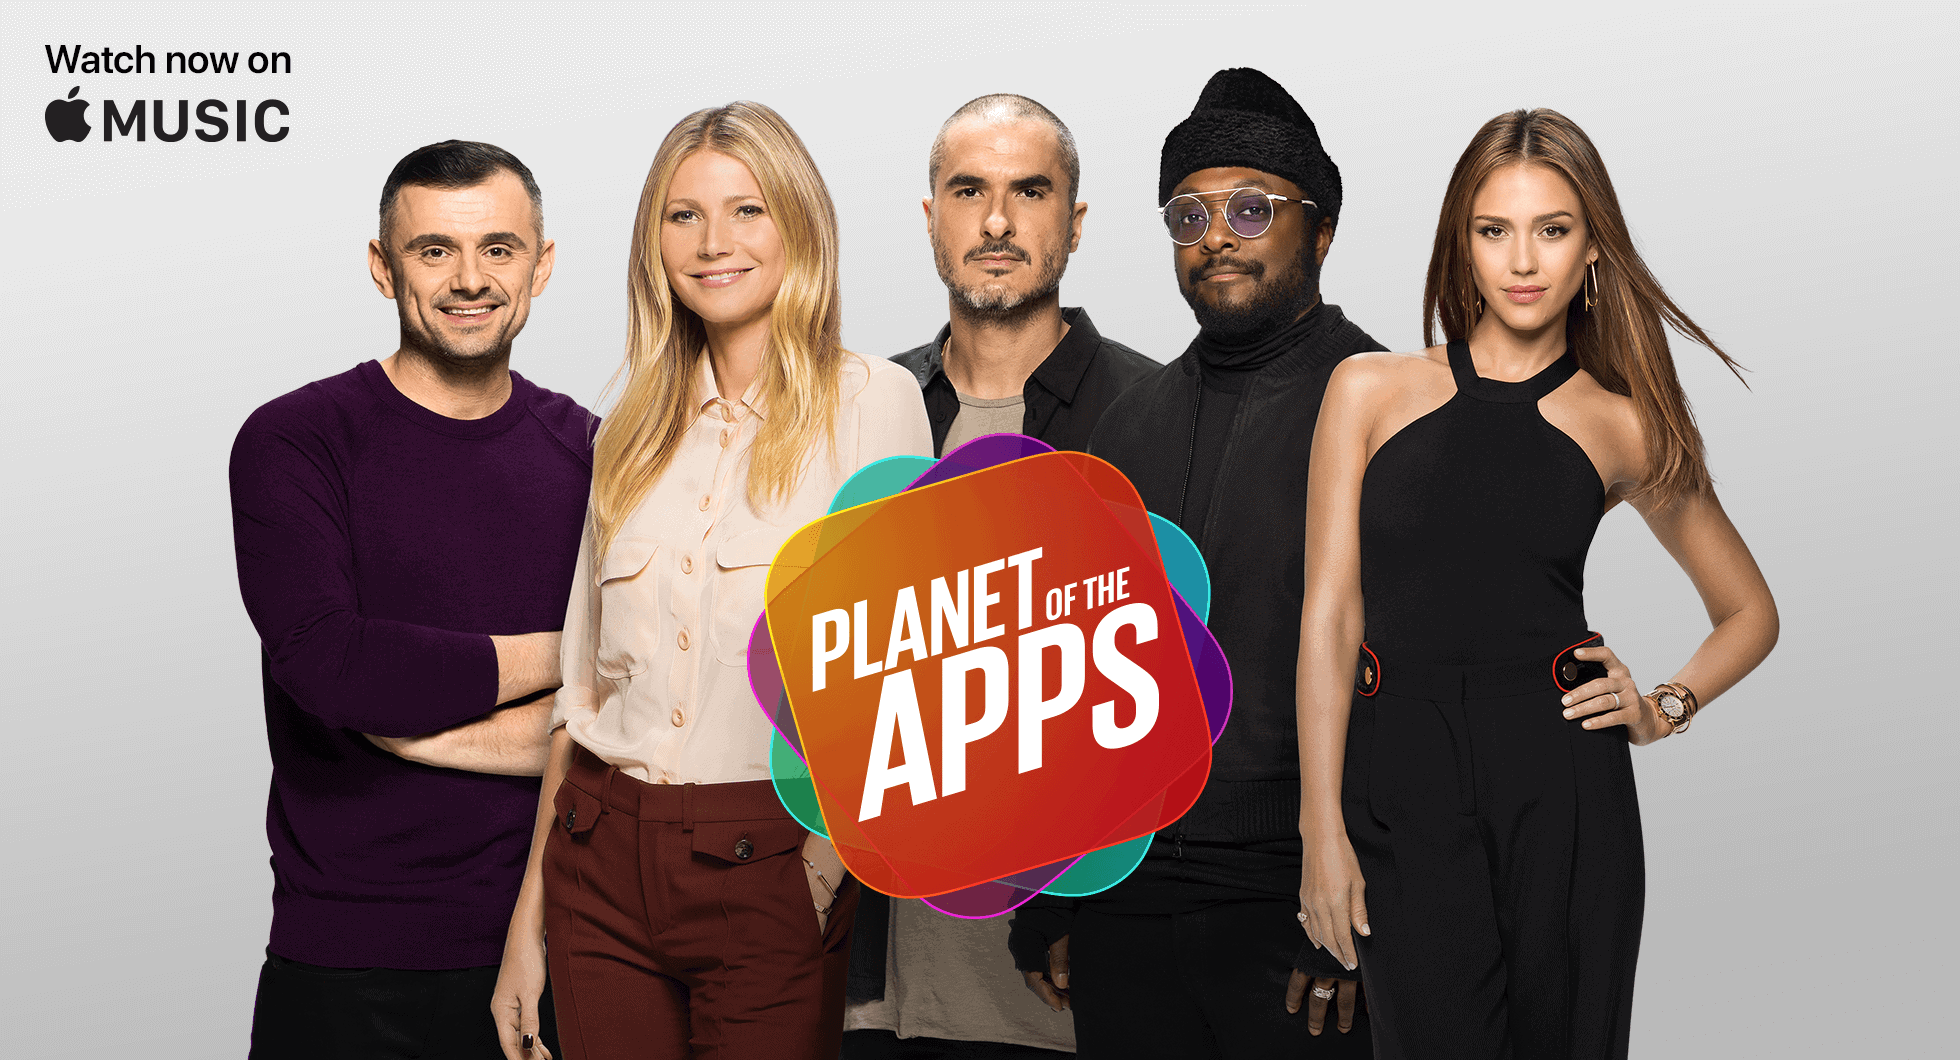 How to Watch My Show ‘Planet of the Apps’ On Android & iOS for FREE!